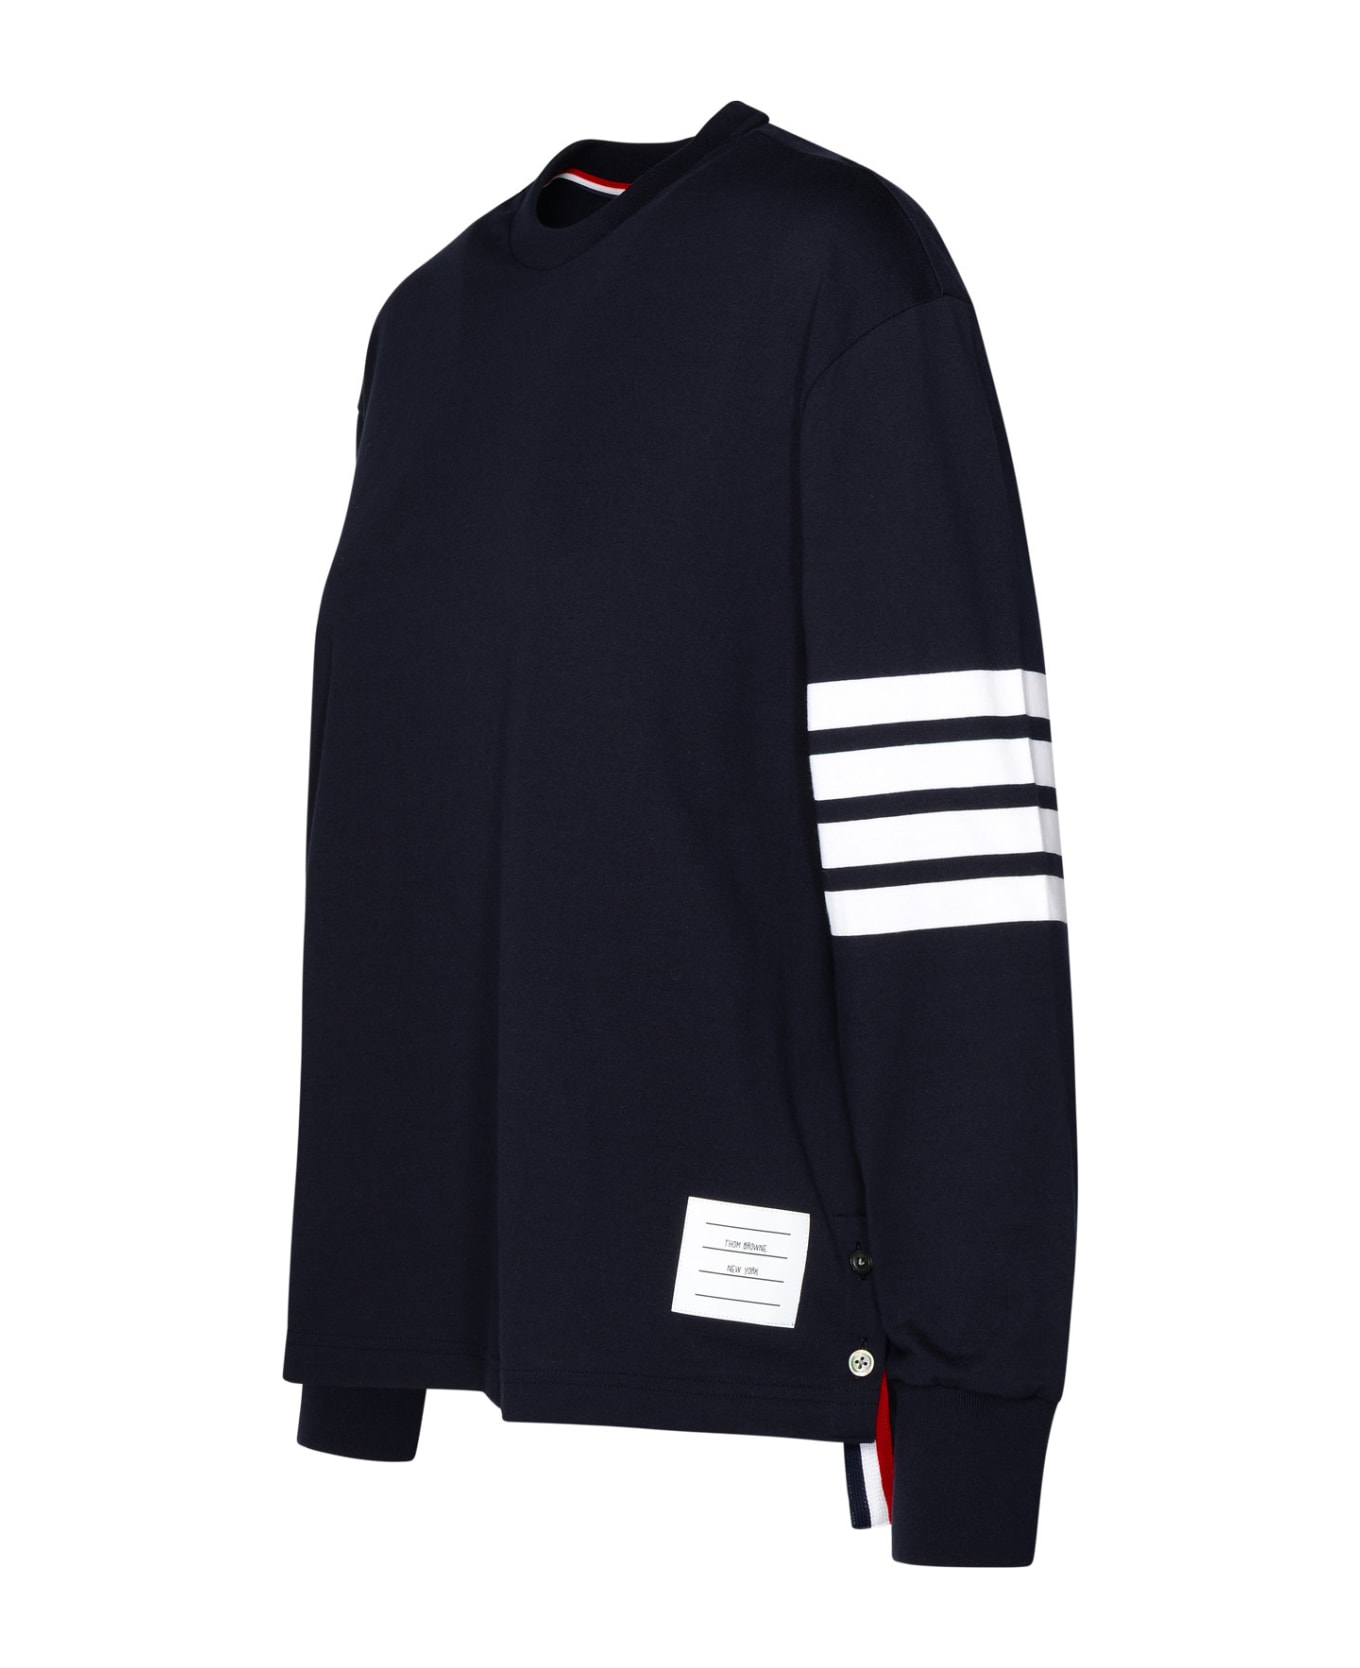 Thom Browne Navy Cotton Sweater - BLUE